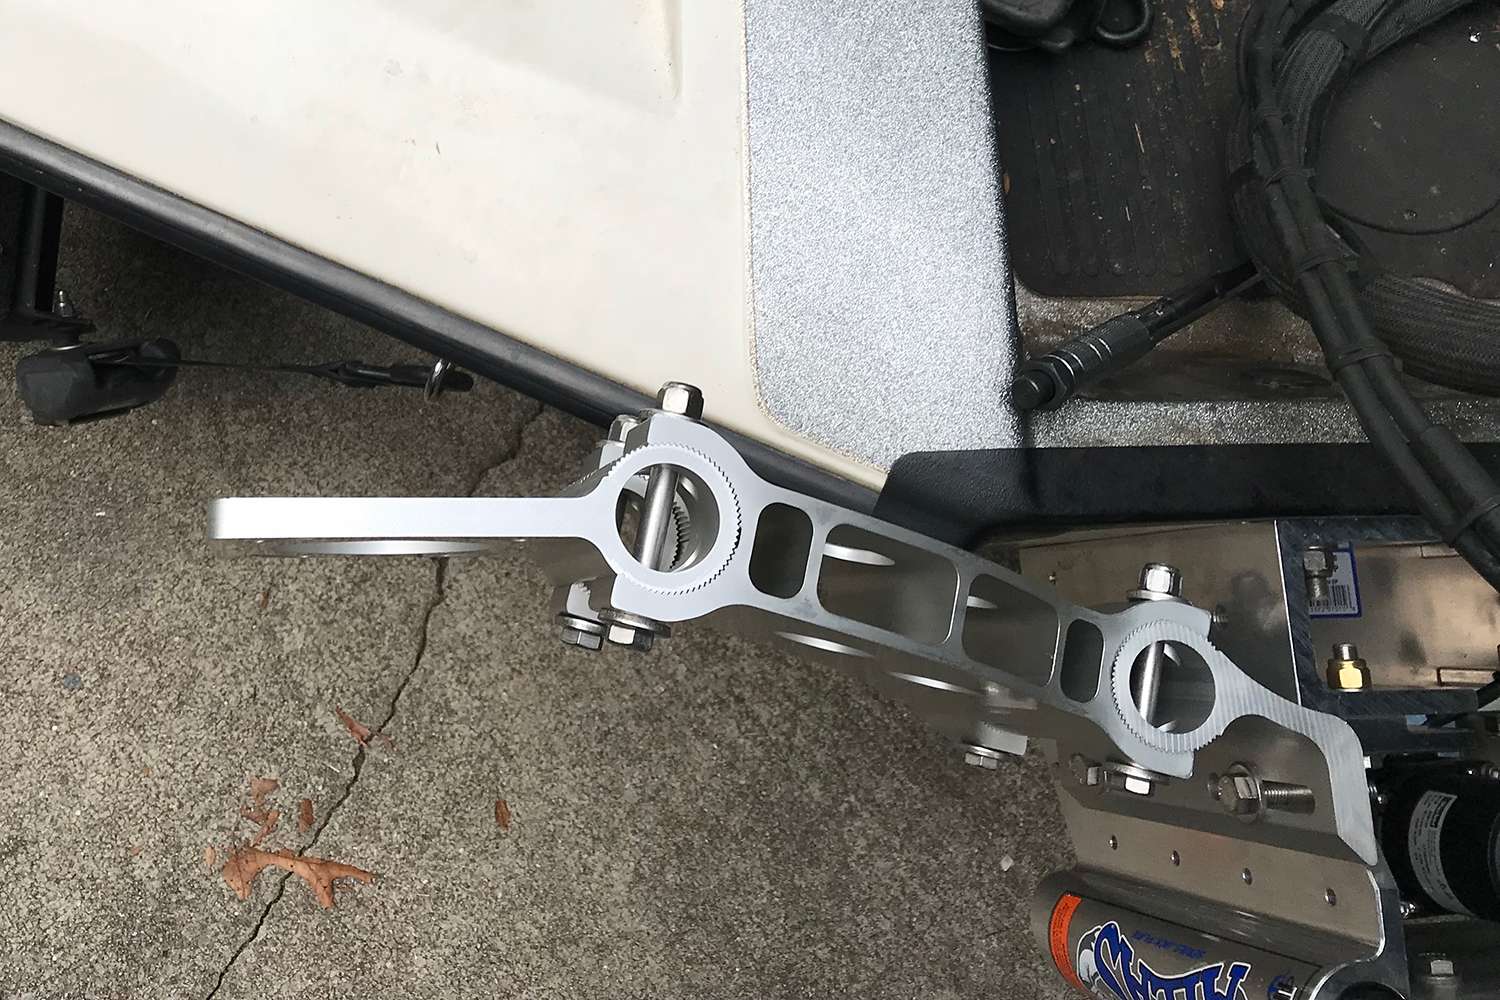 I've eye-balled this bracket being parallel with the transom. Essentially you want it to be square with the boat, parallel with the back and perpendicular with the gunnel. 